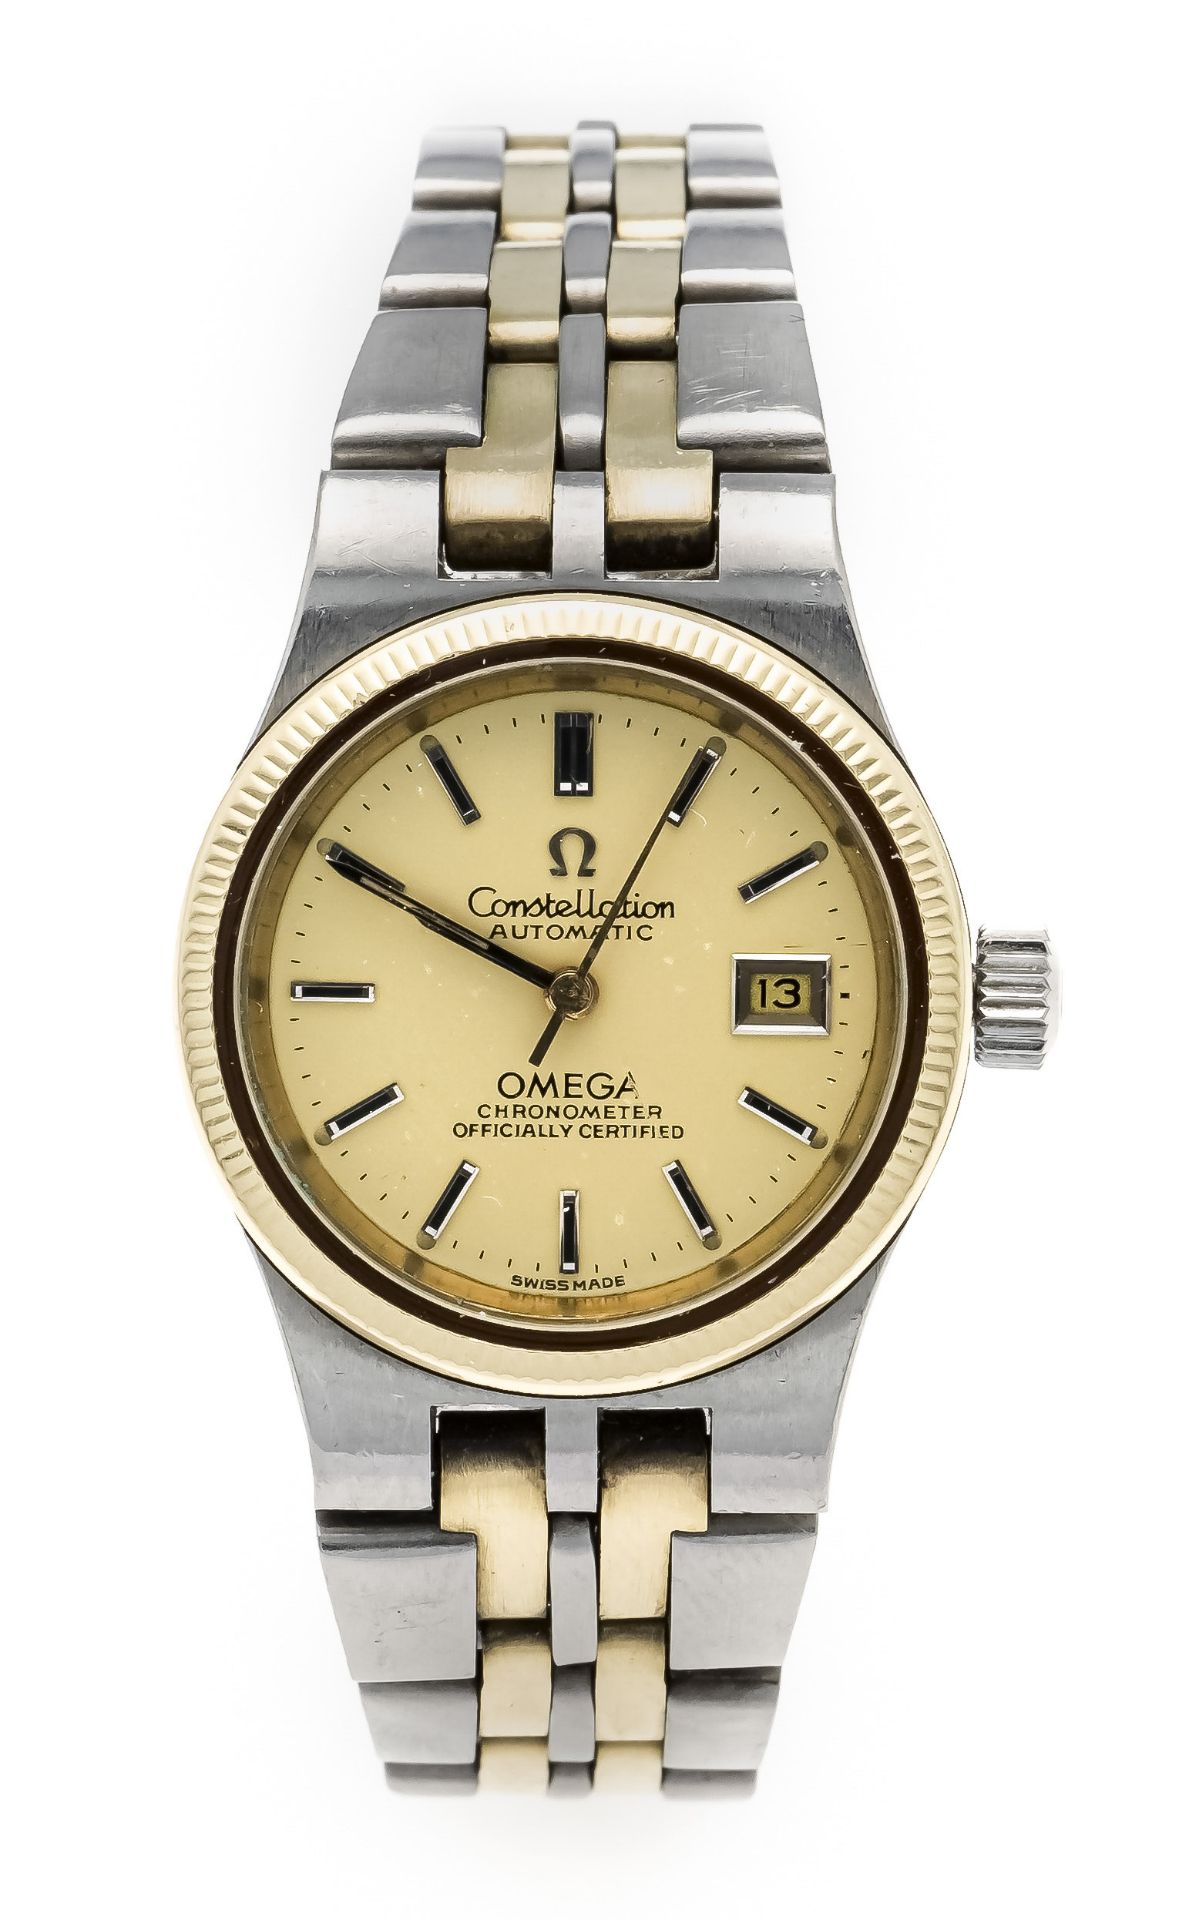 Omega Constellation ladies' watch, steel / gold 750/000, circa 1970, Ref. 568.0019, gold-colored